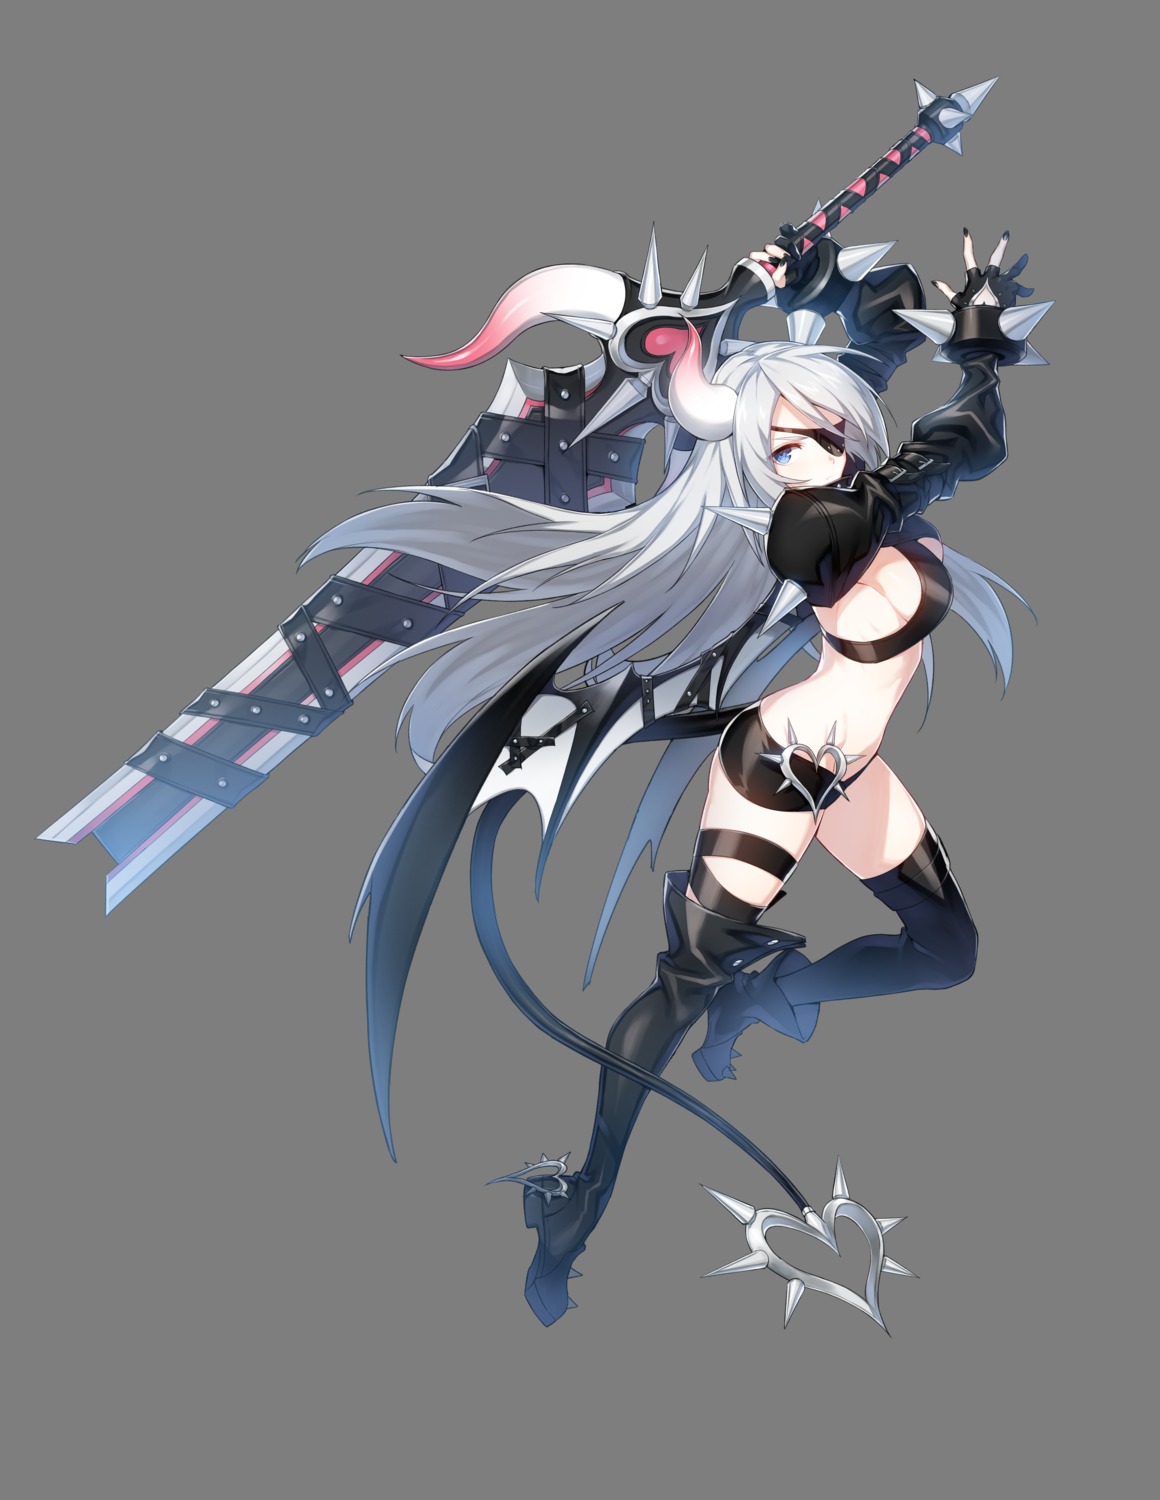 armor closers eyepatch heels horns red_star_alliance sword tail thighhighs transparent_png violet_(closers) weapon wings